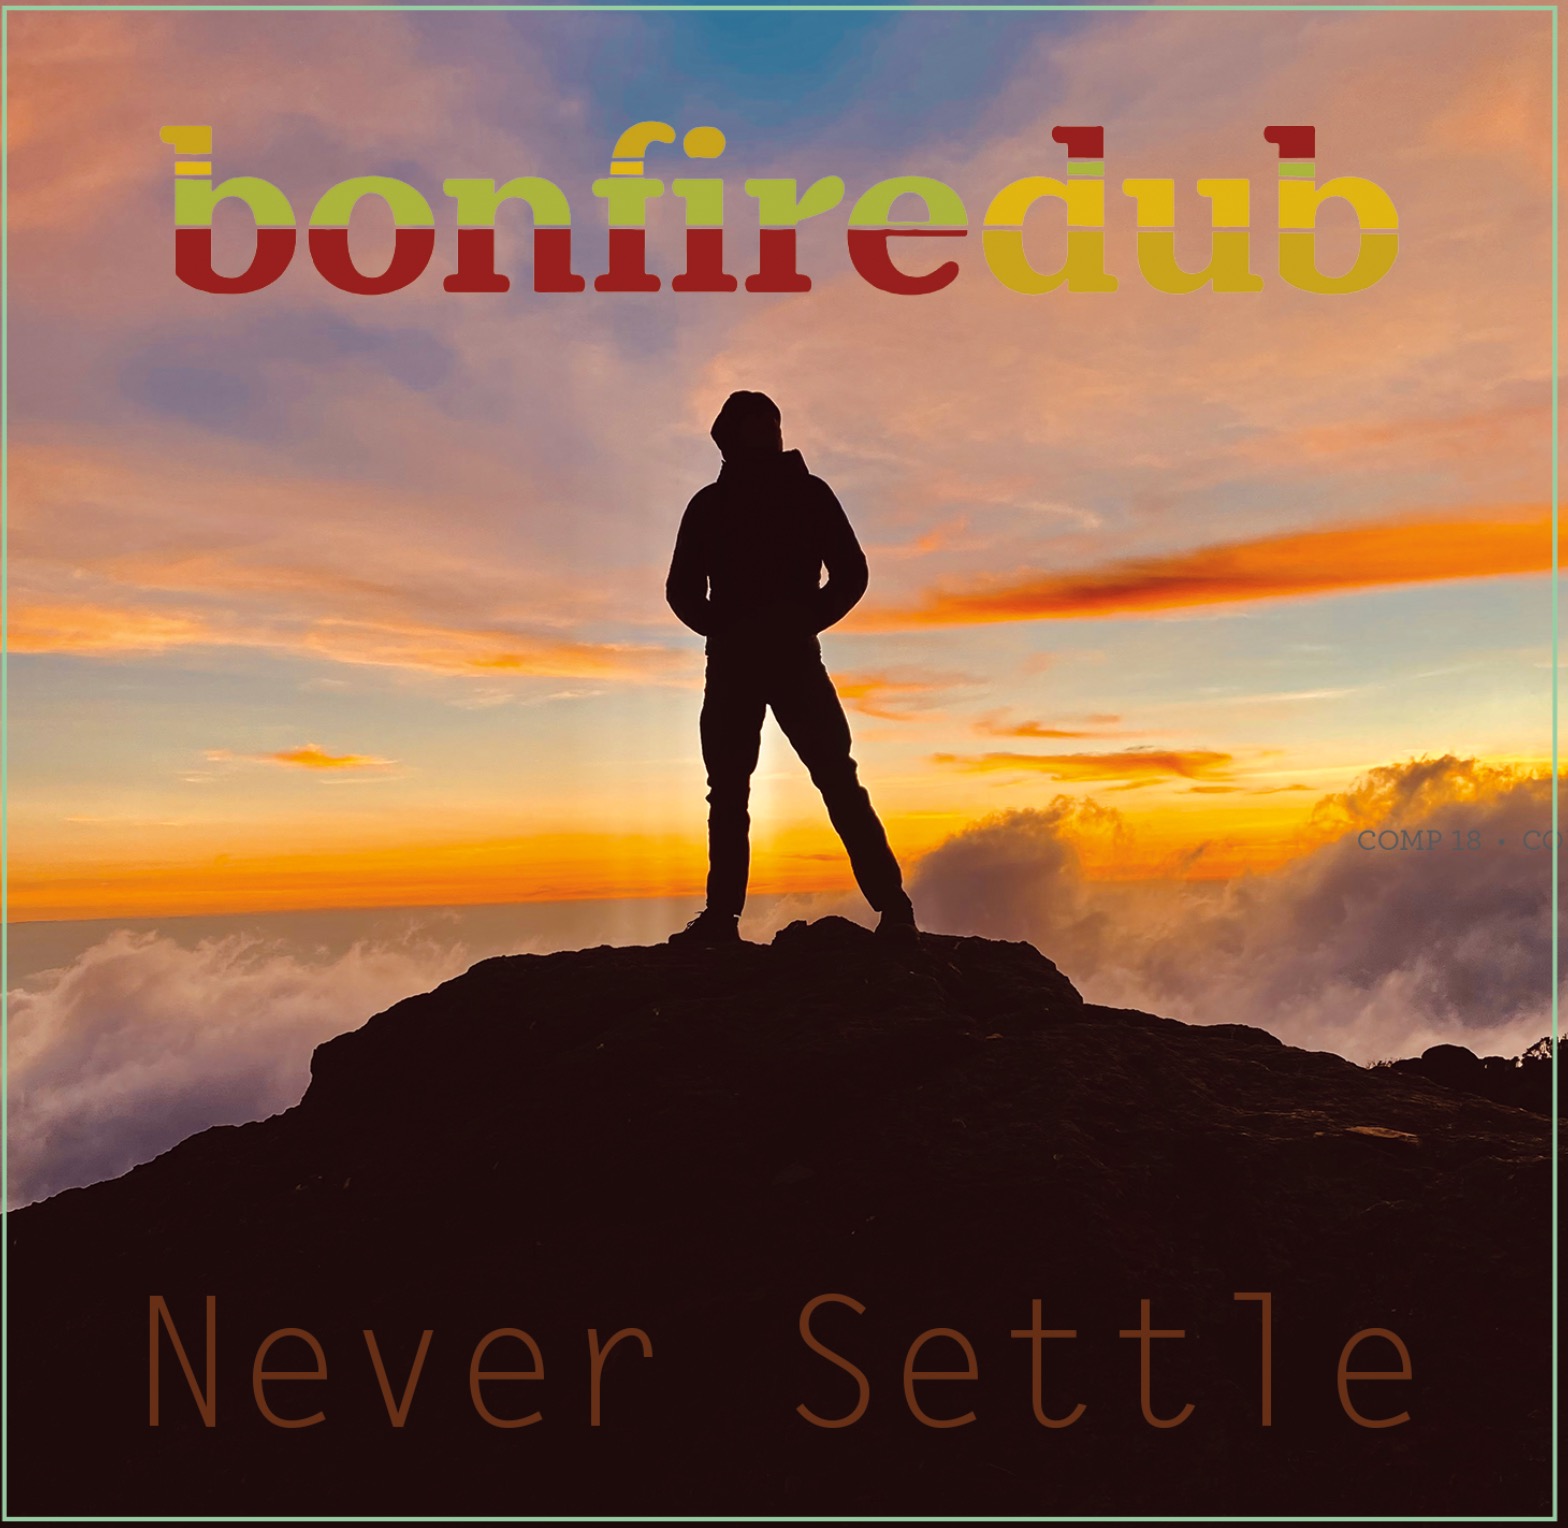 Bonfire Dub Celebrates New Single “Never Settle” with Upcoming Tour Dates this Fall